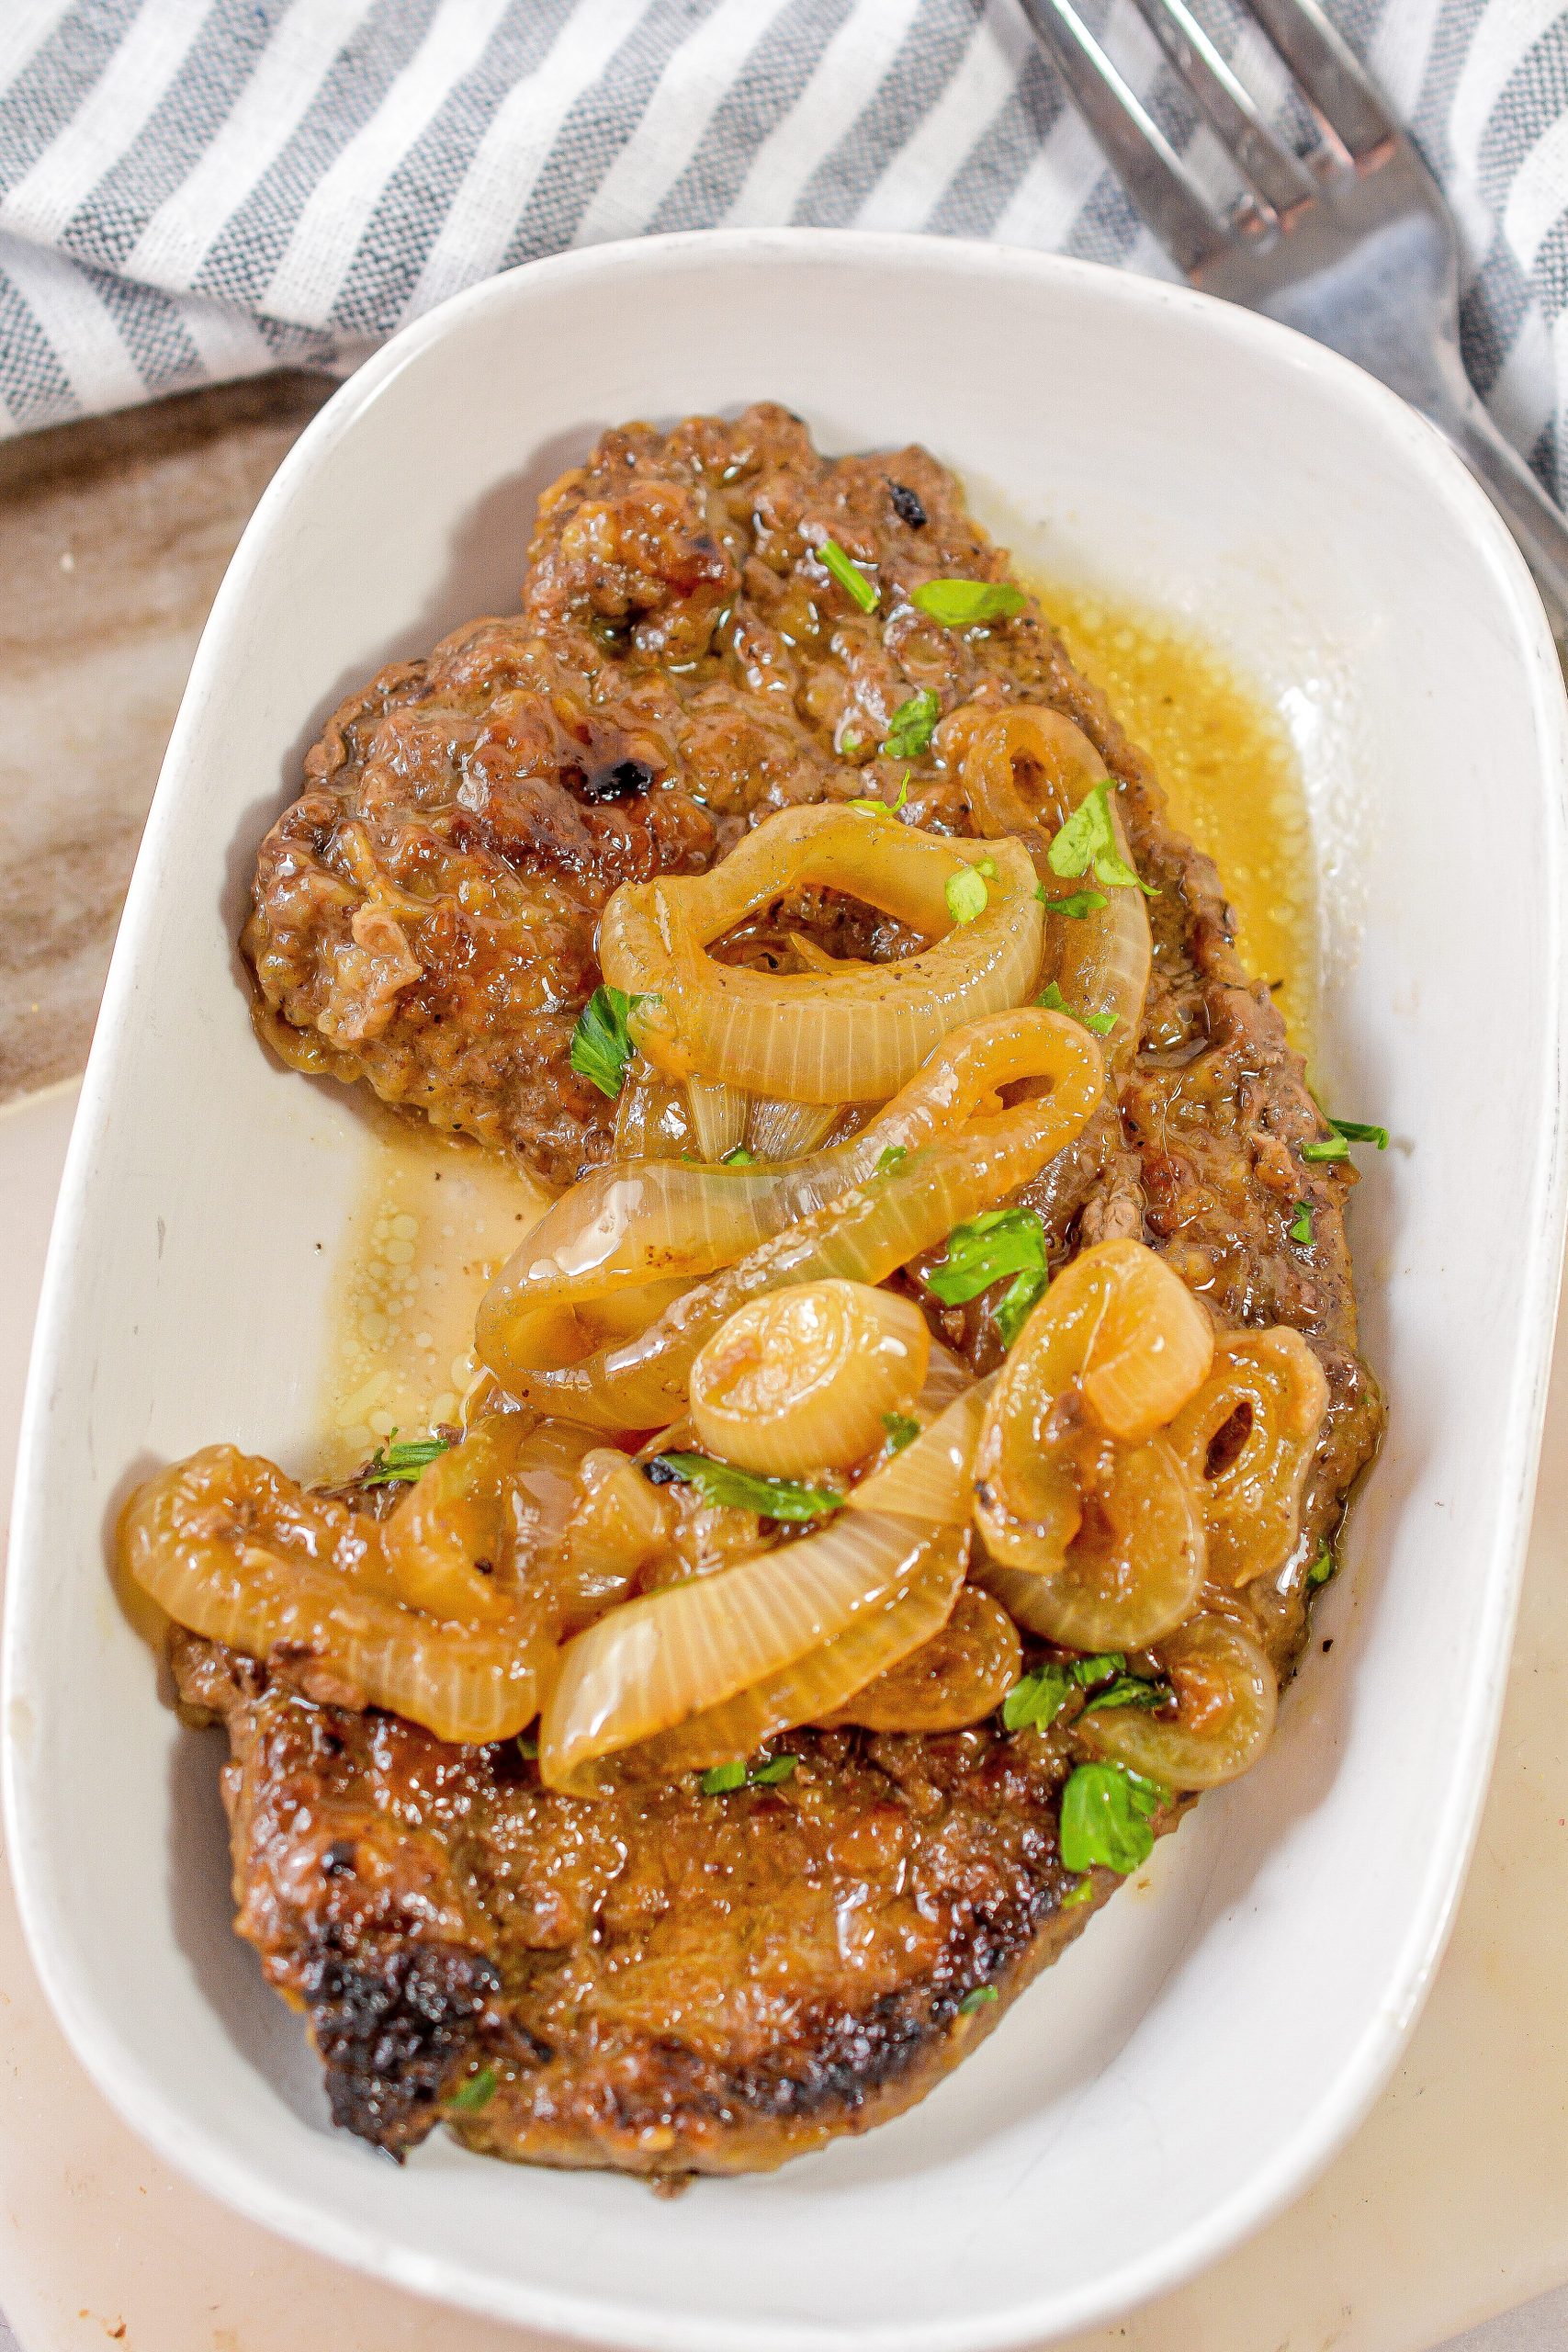 Liver and Onions, Liver and Onions recipe